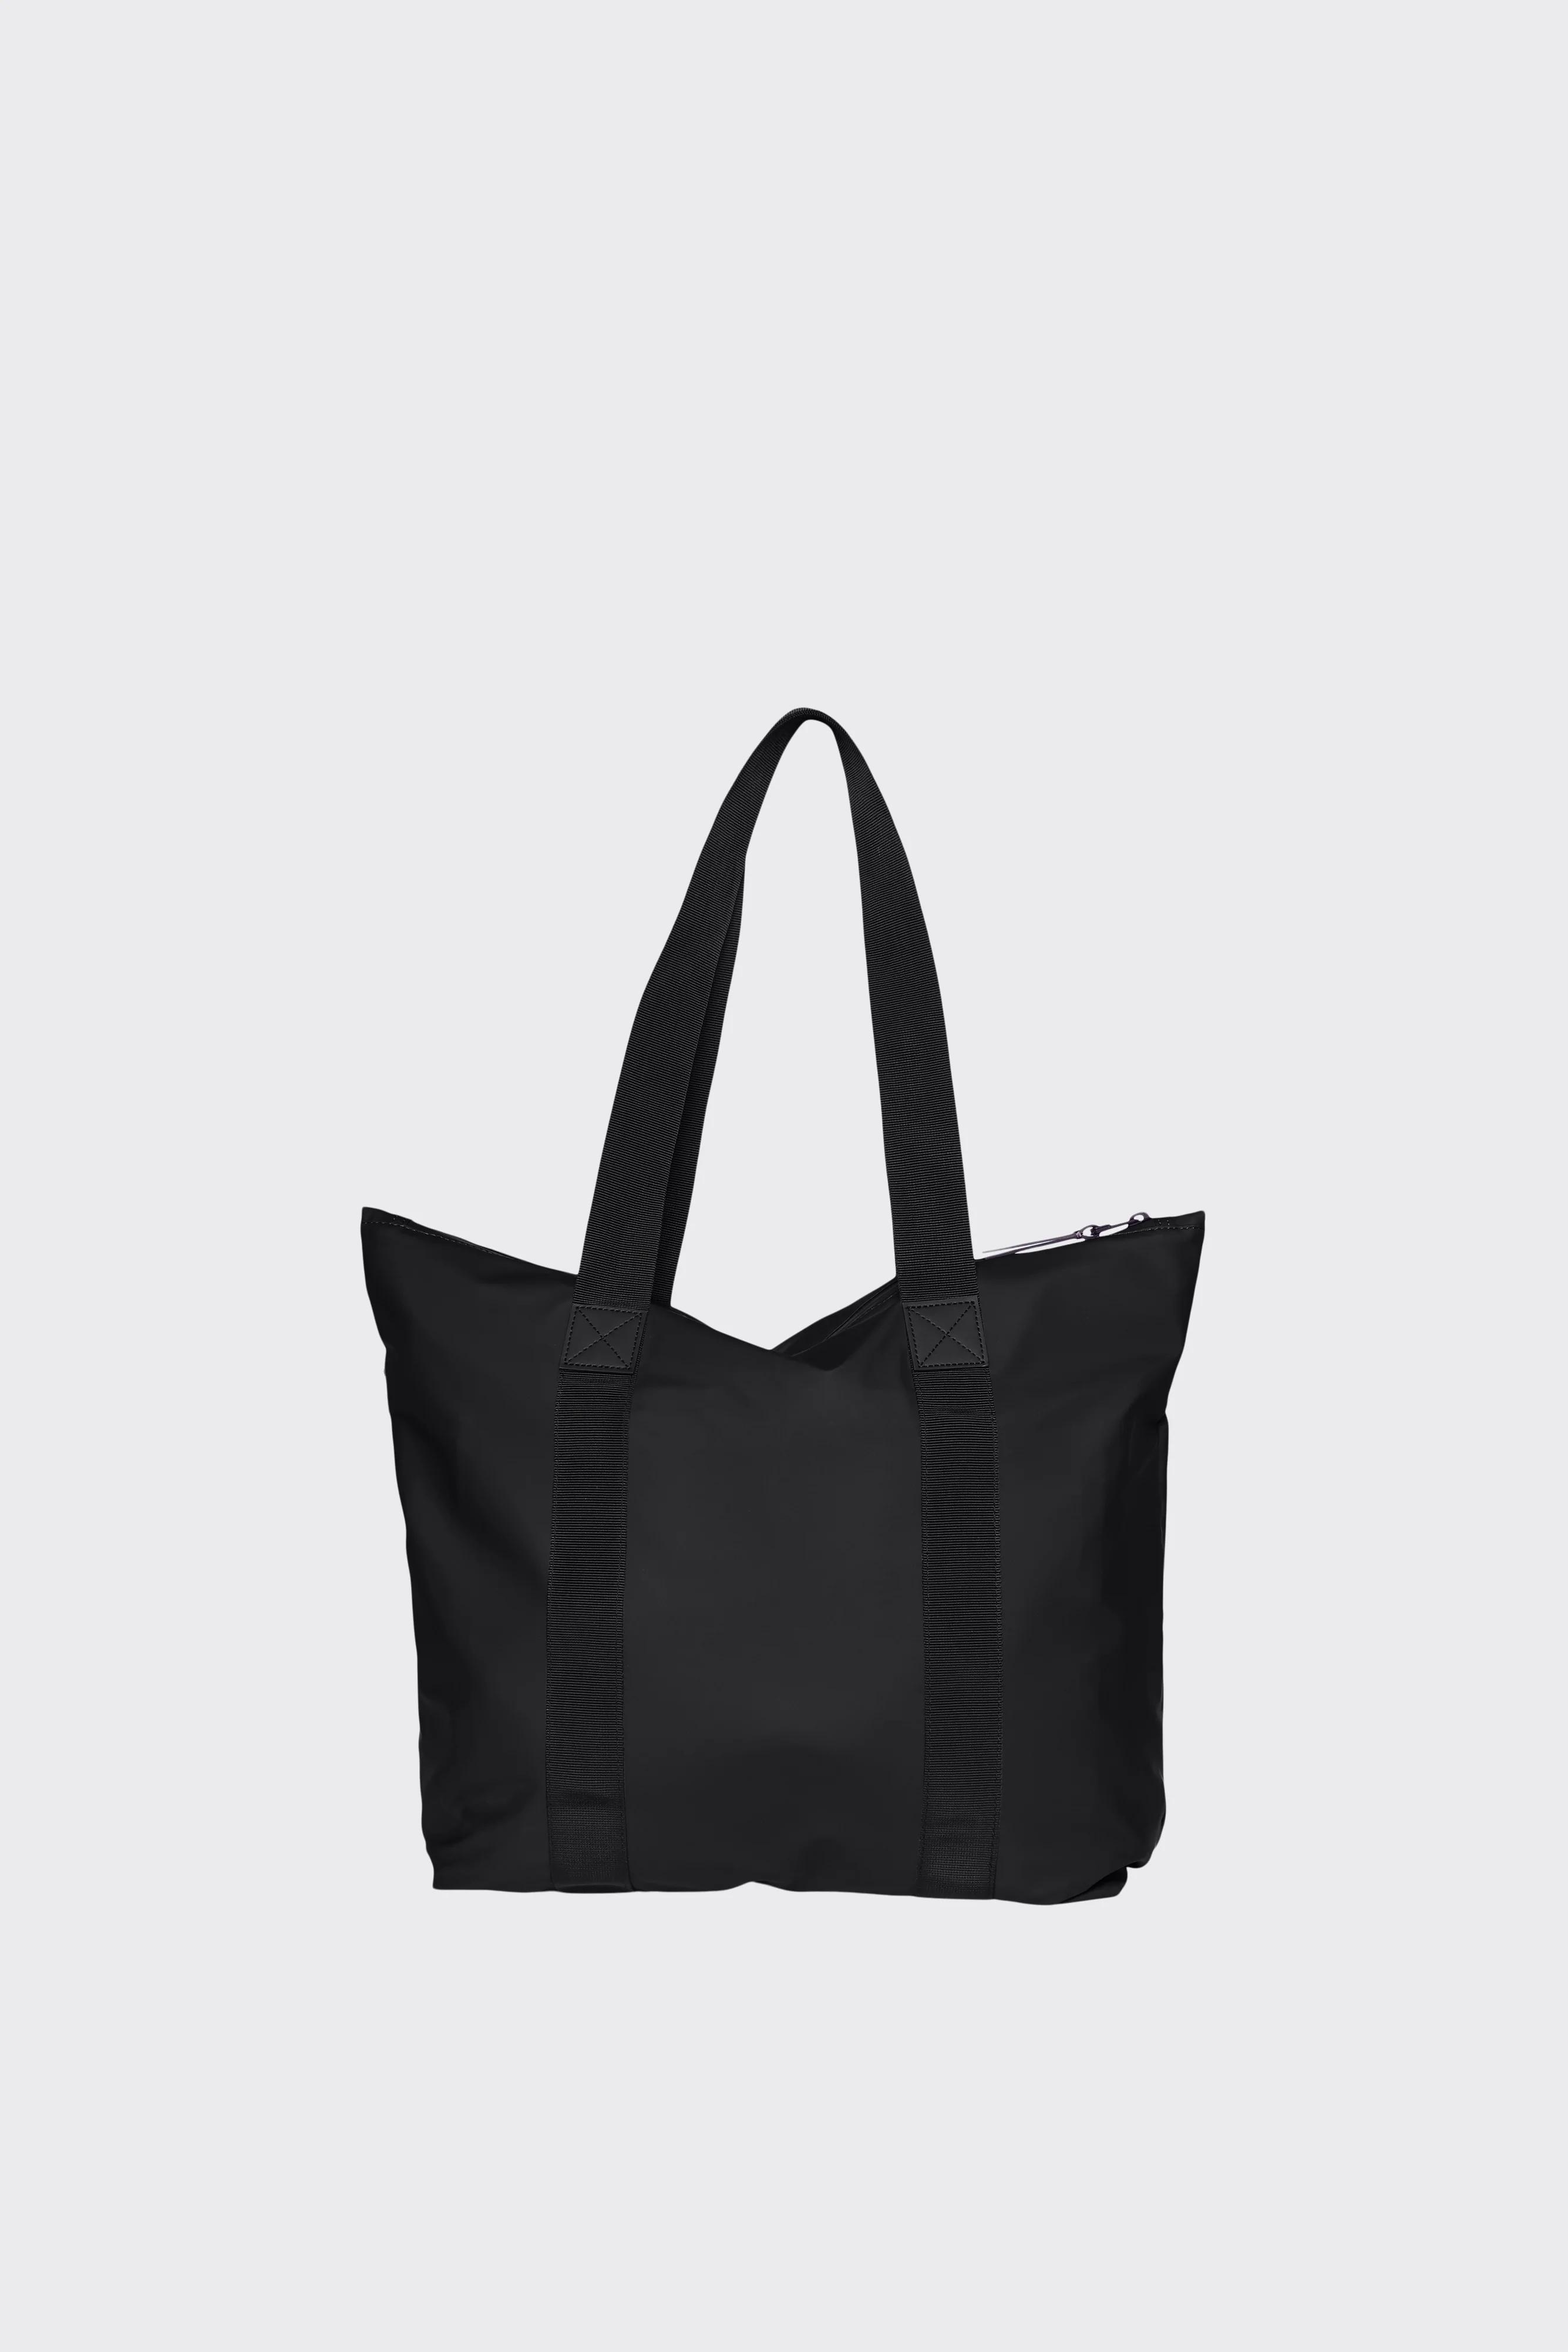 Product Image for Rush Tote Bag, Black